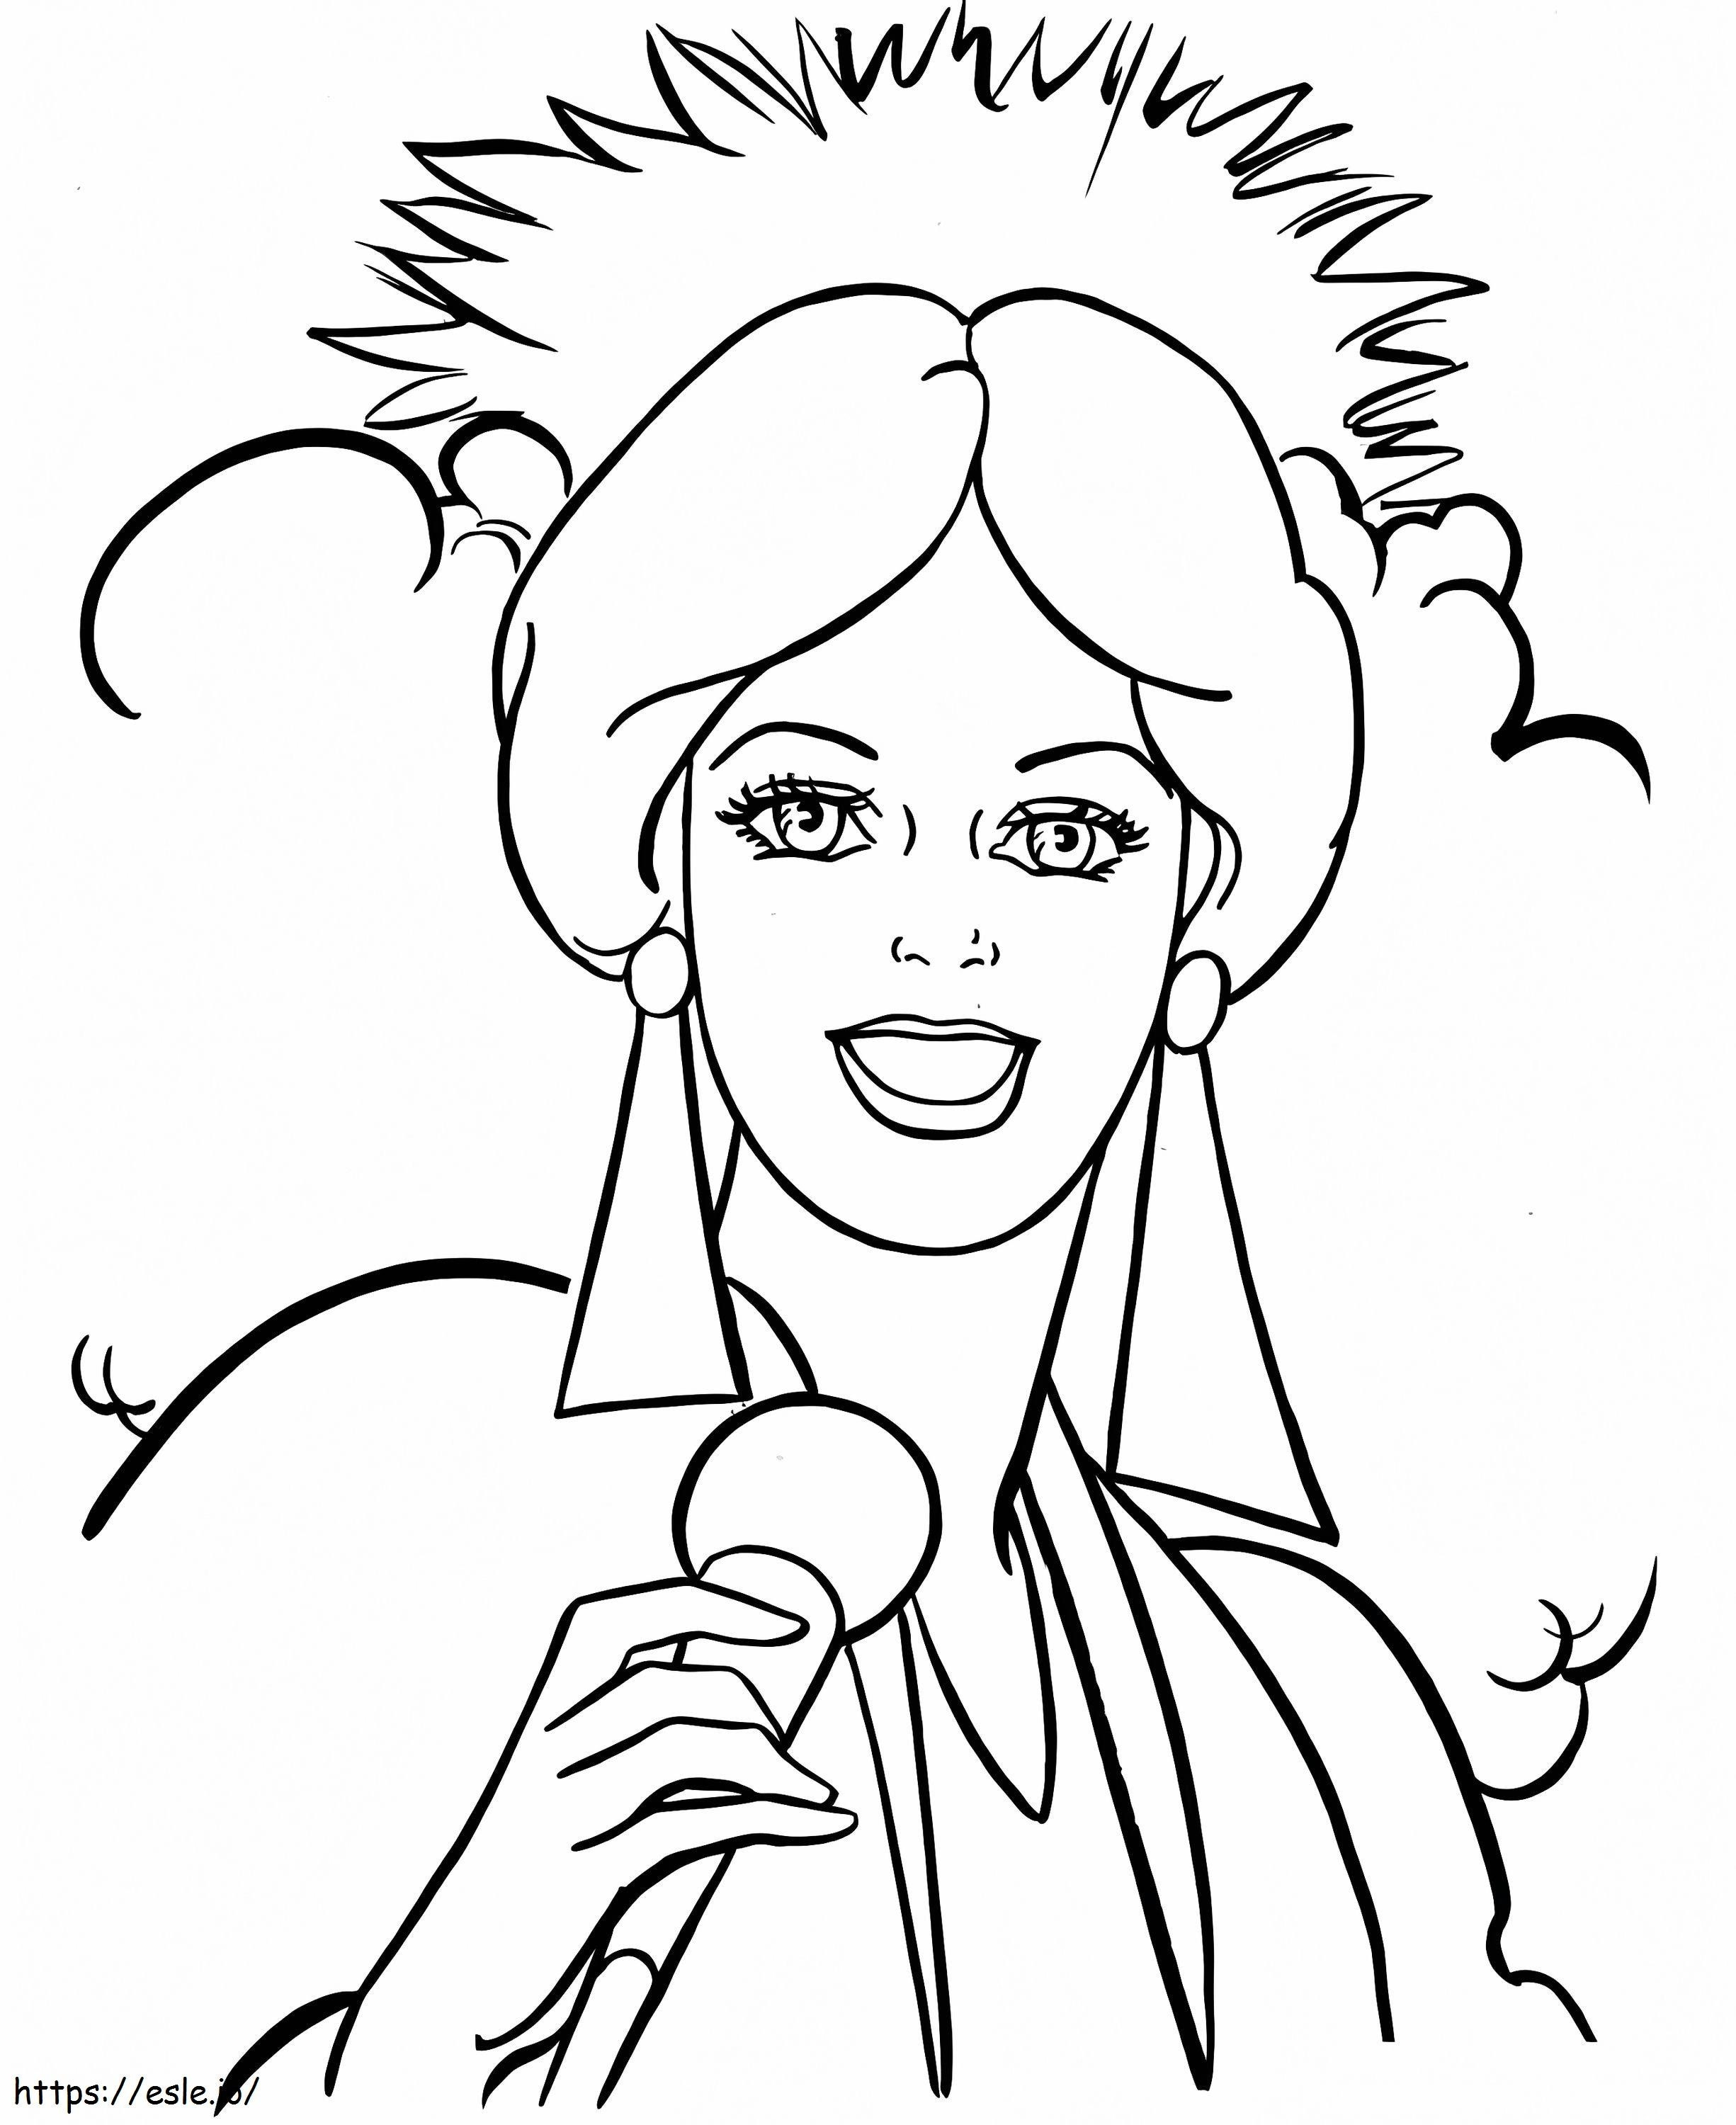 Happy Singer coloring page